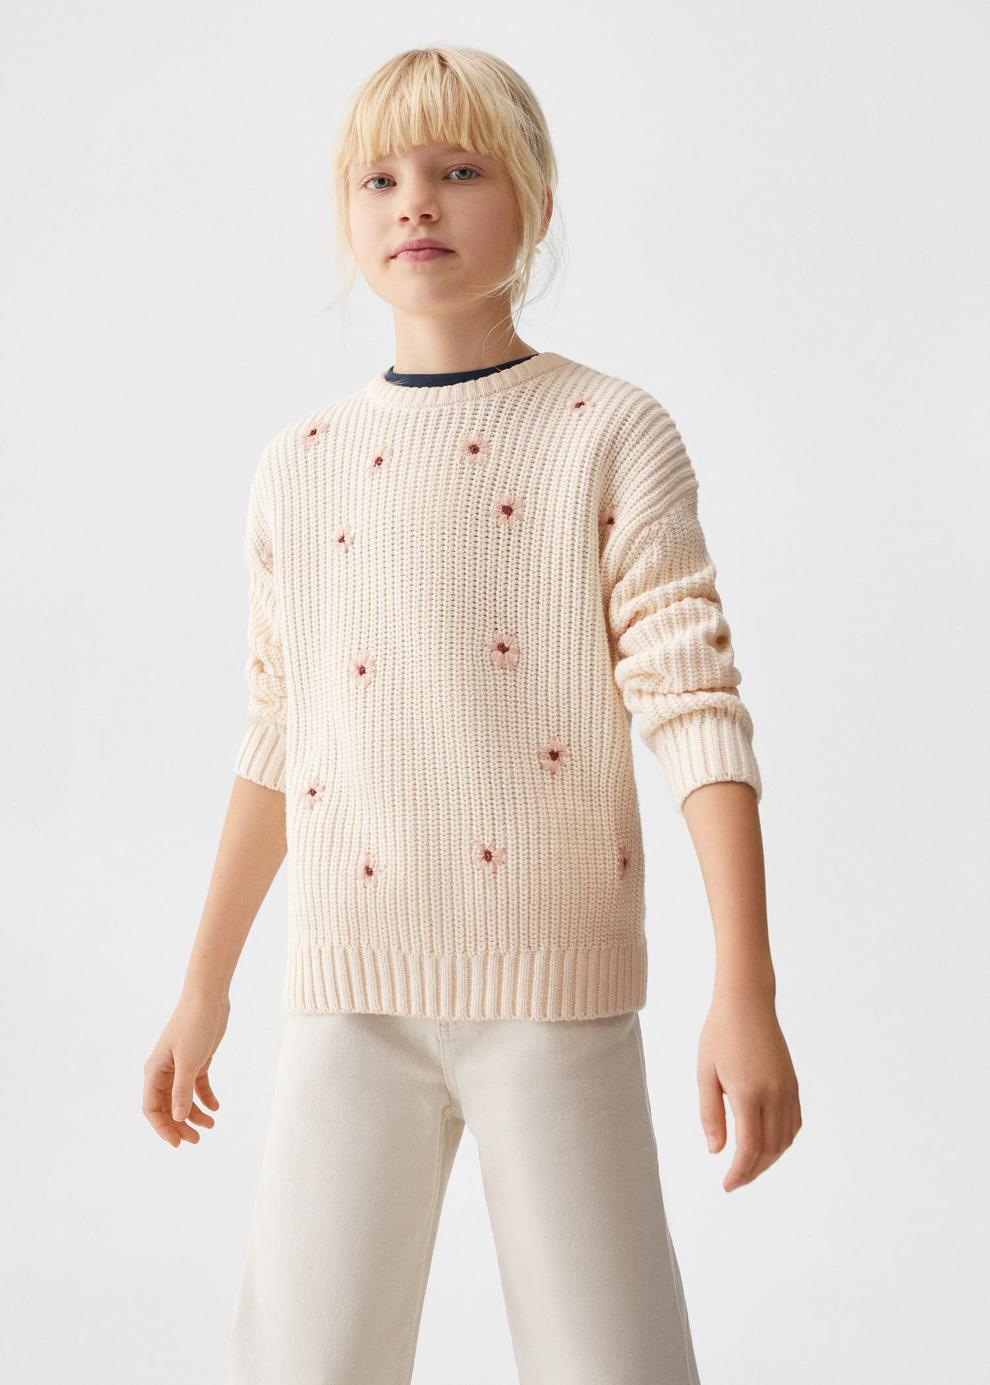 Floral embroidery sweater offers at S$ 59.9 in Mango Kids